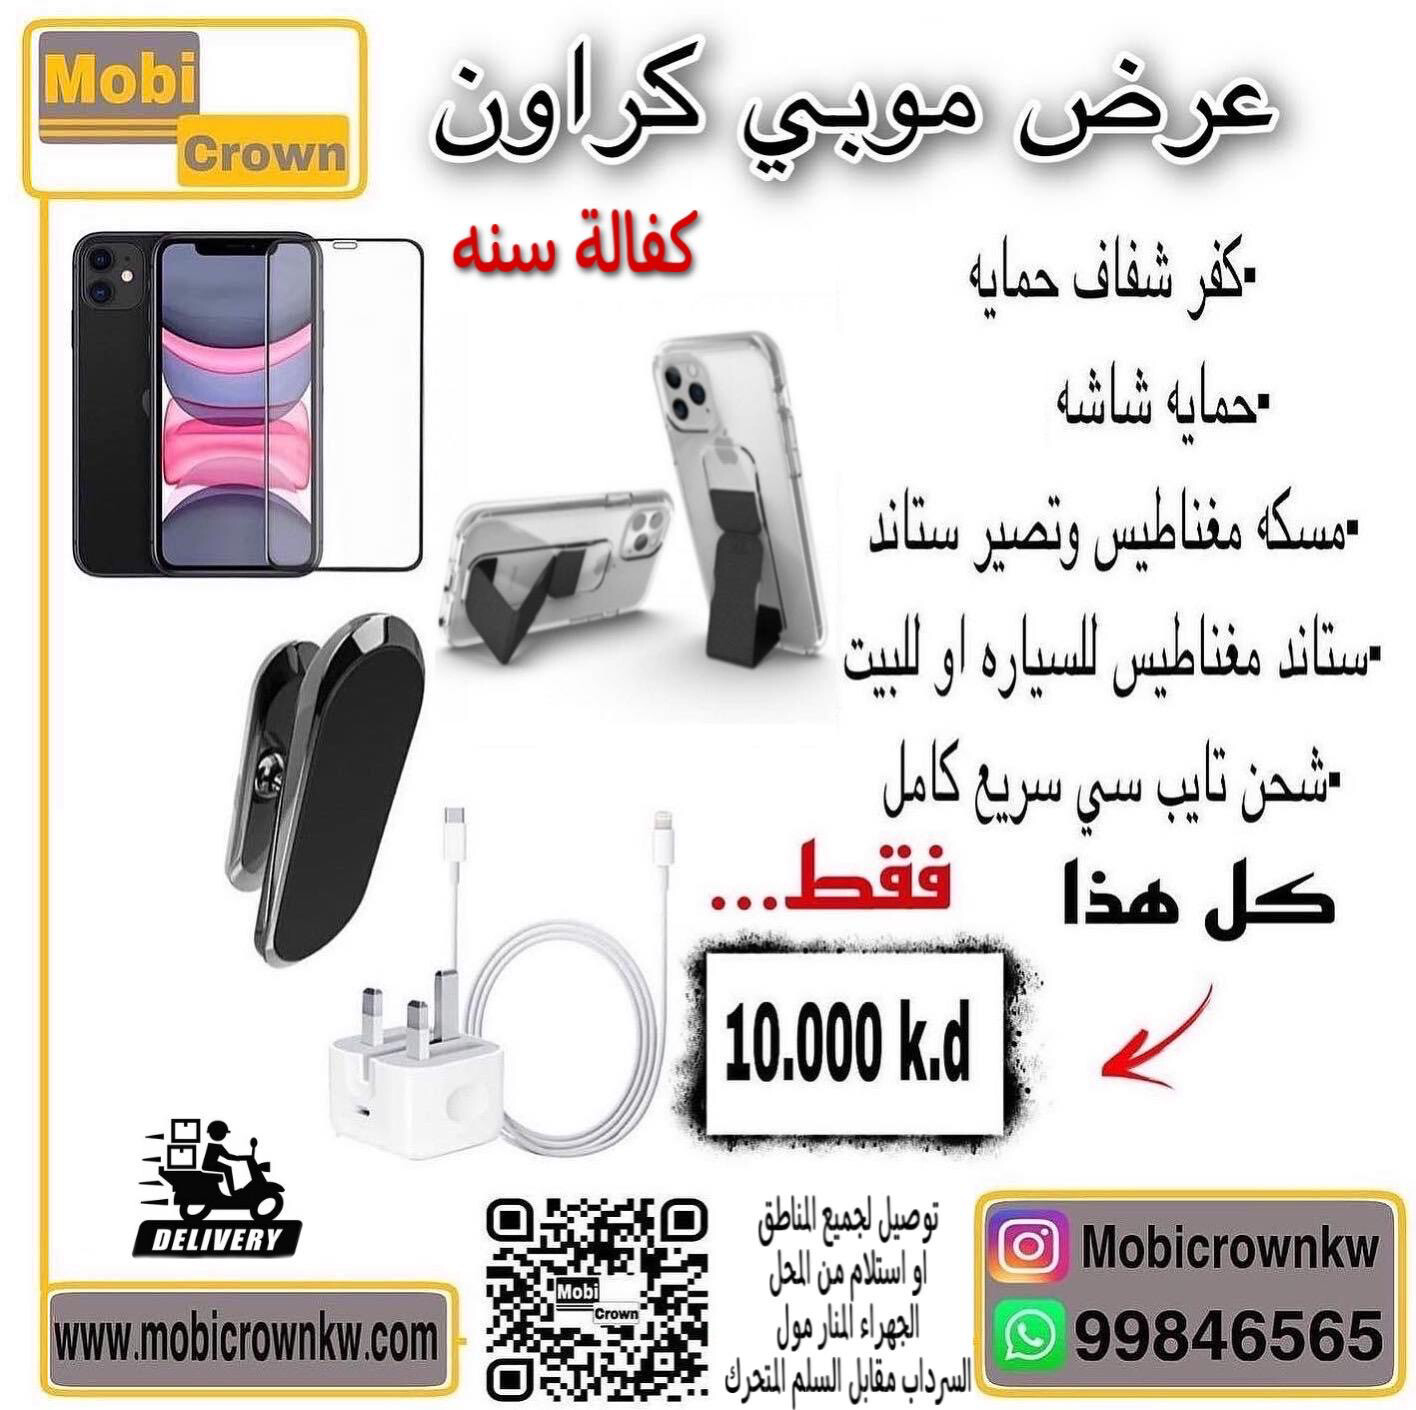 mobicrown offer